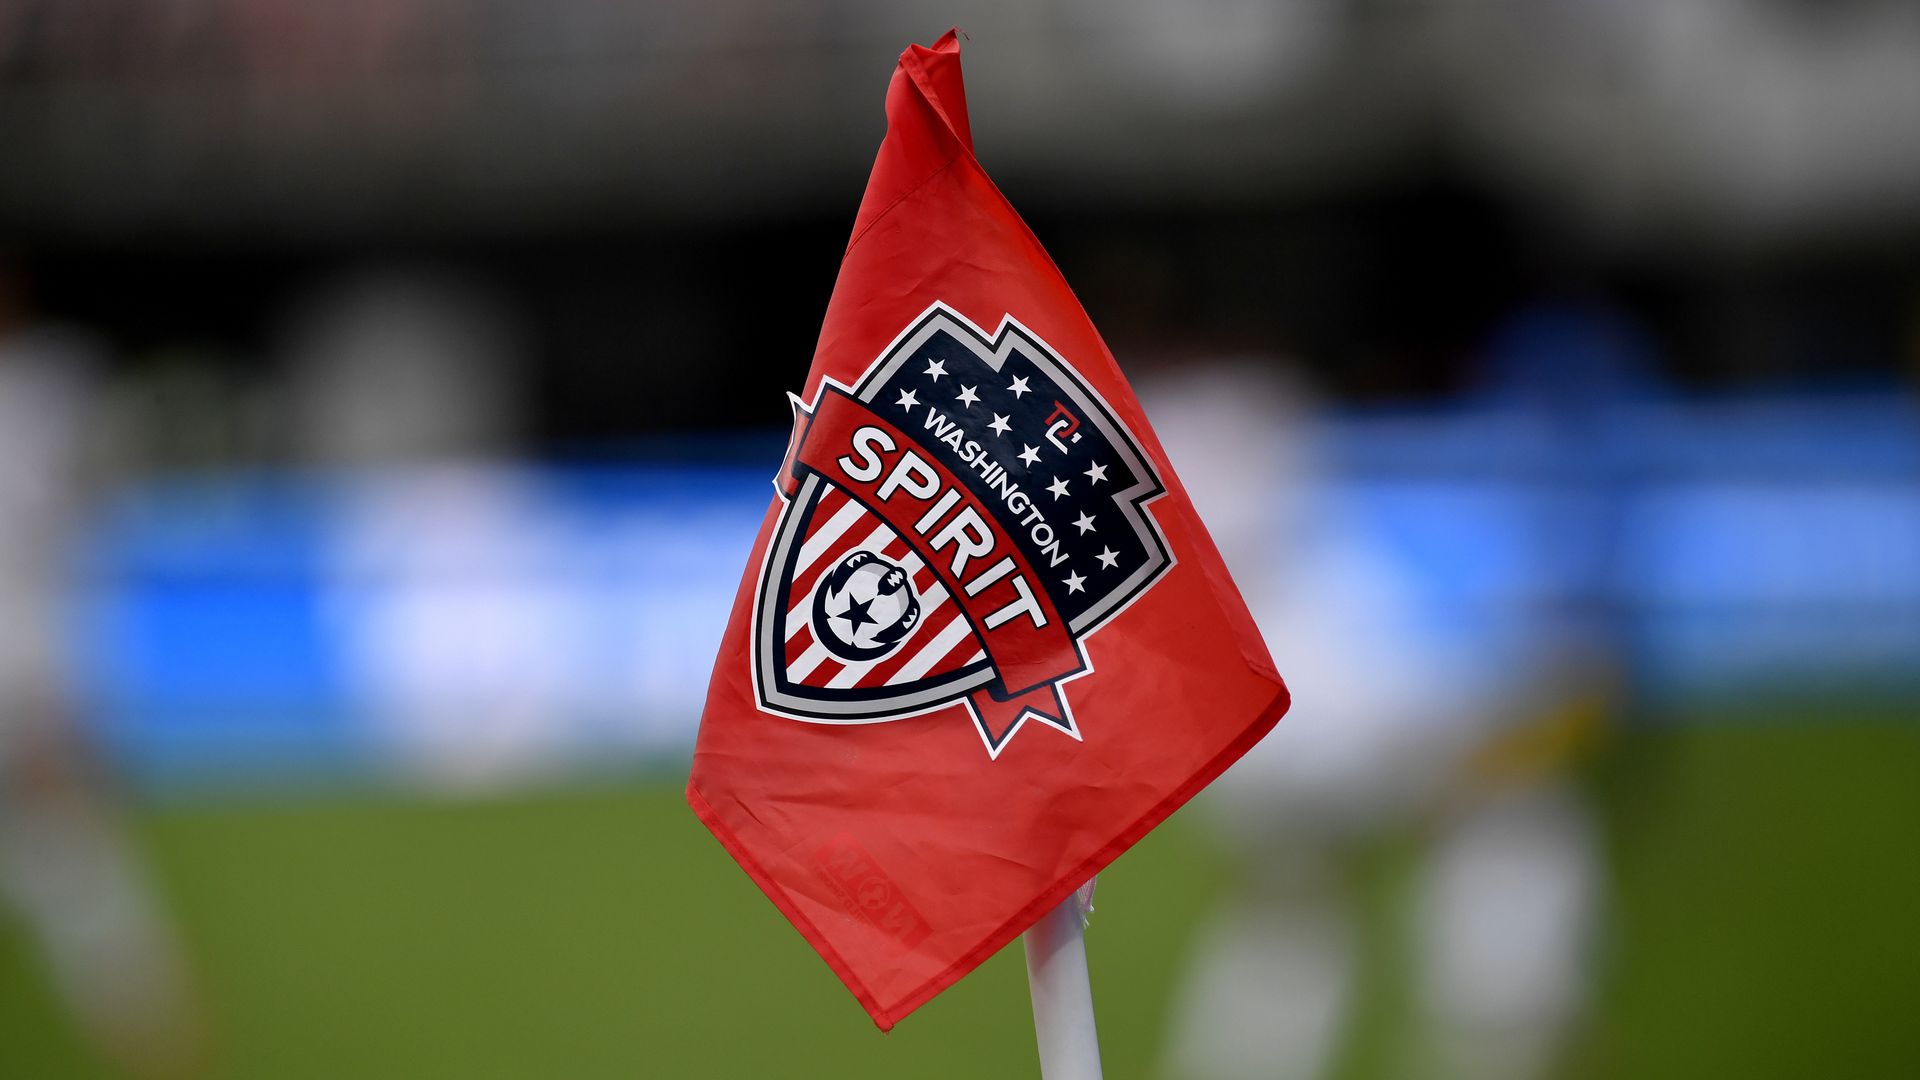 A red soccer corner flag is shown in close up during the NWSL game between Orlando Pride and Washington Spirit August 22, 2021 at Audi Field in Washington, DC